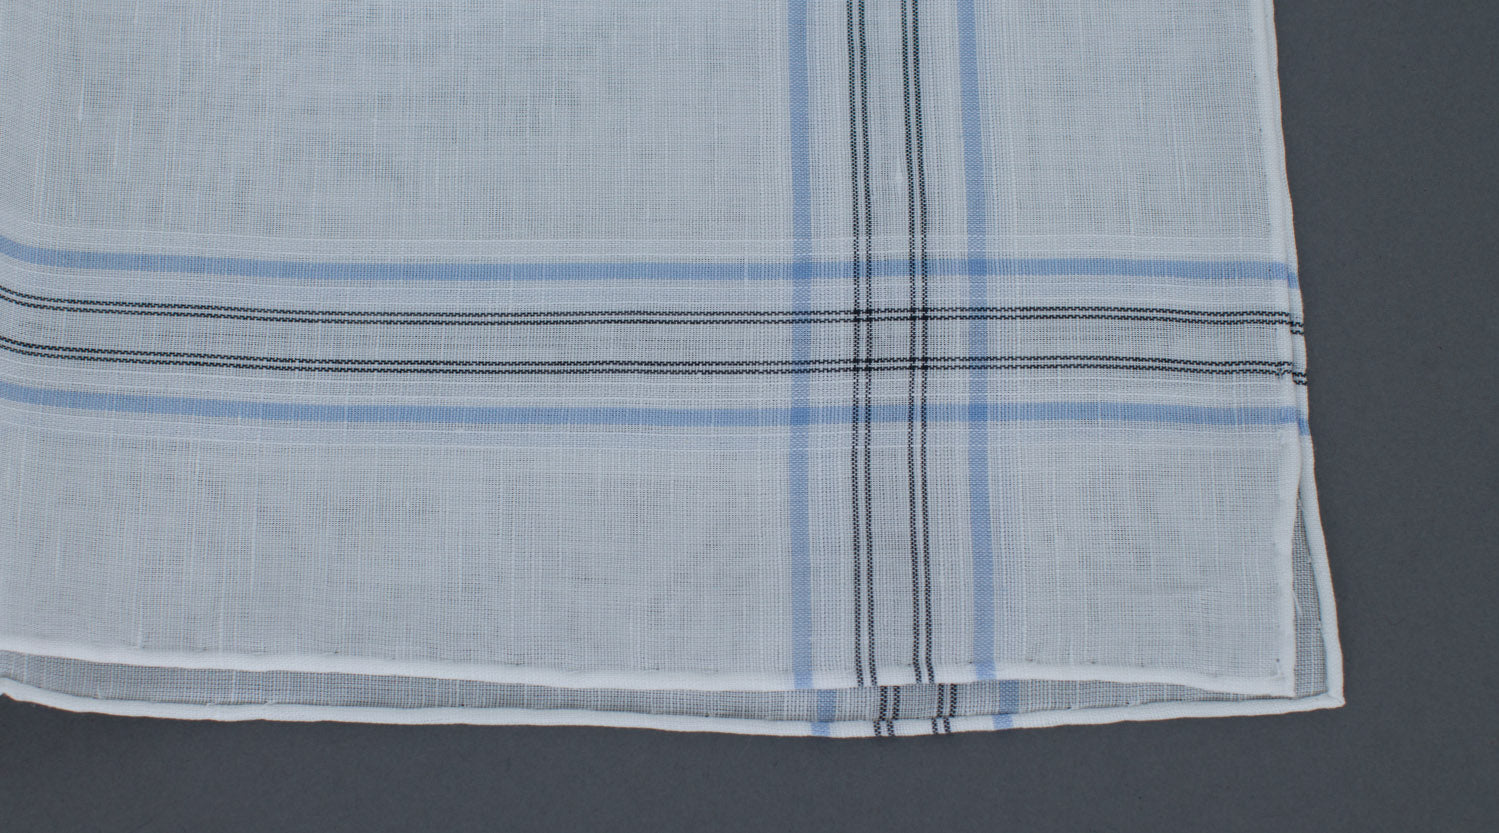 A Simonnot Godard Aran Pocket Square with blue and white stripes, made in France, available at KirbyAllison.com.